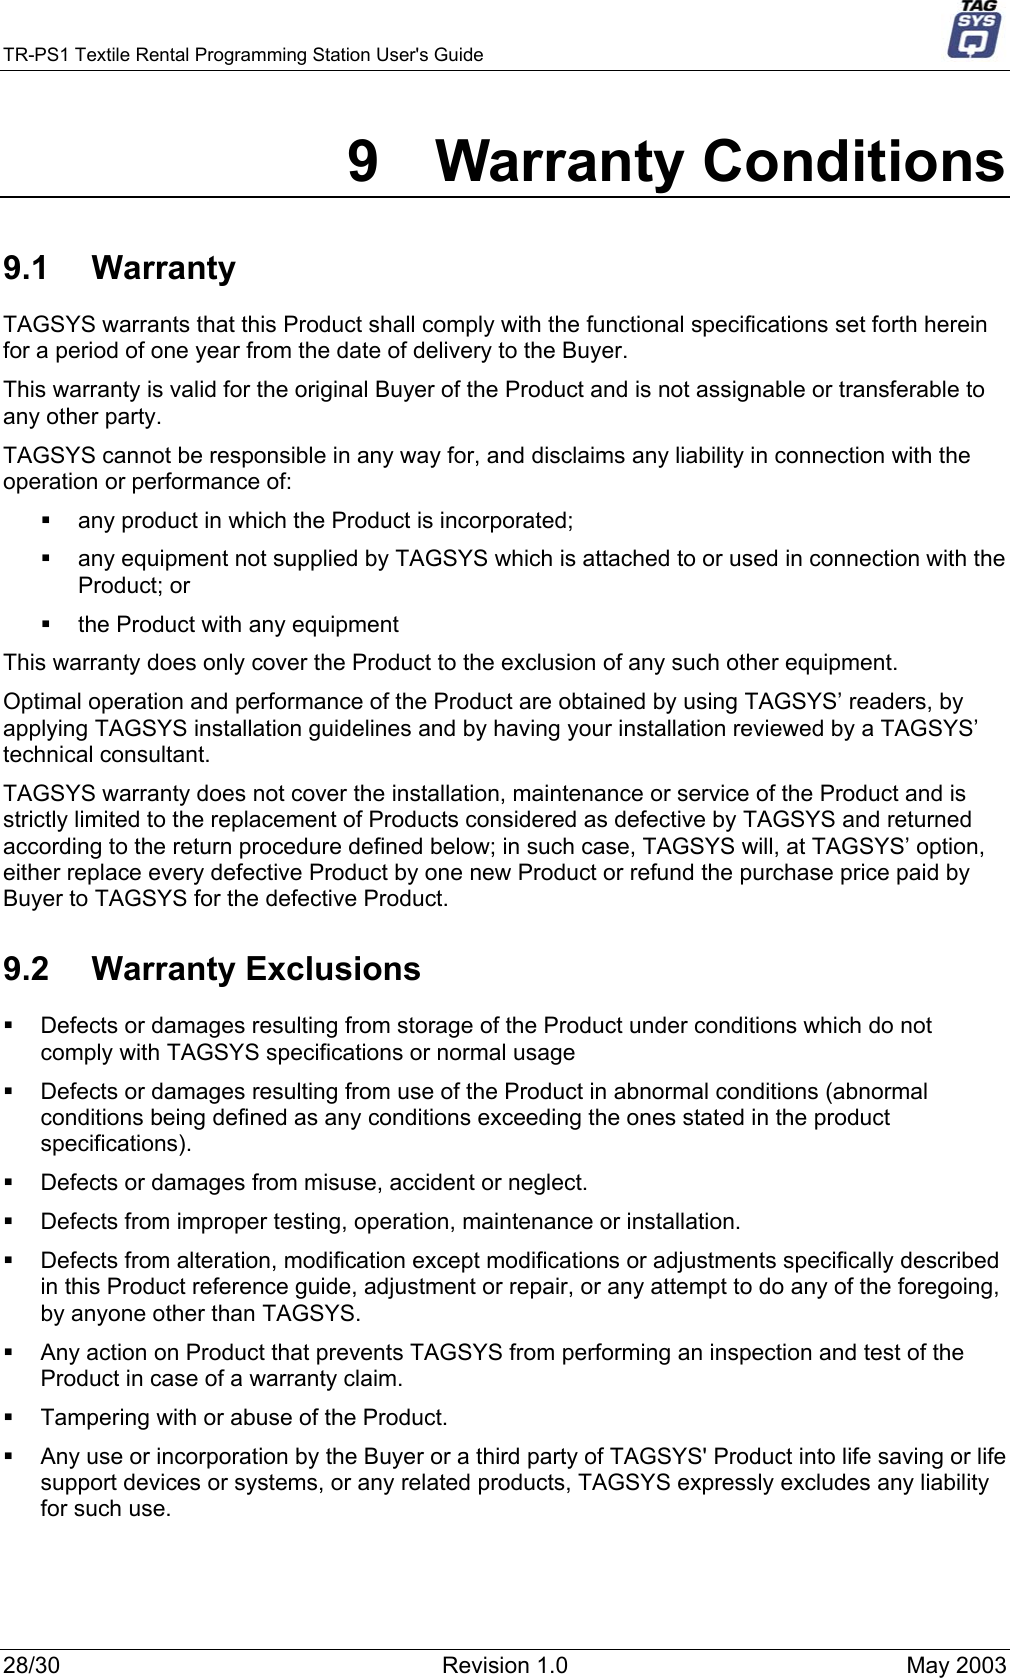 TR-PS1 Textile Rental Programming Station User&apos;s Guide     9 Warranty Conditions 9.1 Warranty TAGSYS warrants that this Product shall comply with the functional specifications set forth herein for a period of one year from the date of delivery to the Buyer. This warranty is valid for the original Buyer of the Product and is not assignable or transferable to any other party. TAGSYS cannot be responsible in any way for, and disclaims any liability in connection with the operation or performance of:   any product in which the Product is incorporated;   any equipment not supplied by TAGSYS which is attached to or used in connection with the Product; or   the Product with any equipment This warranty does only cover the Product to the exclusion of any such other equipment. Optimal operation and performance of the Product are obtained by using TAGSYS’ readers, by applying TAGSYS installation guidelines and by having your installation reviewed by a TAGSYS’ technical consultant. TAGSYS warranty does not cover the installation, maintenance or service of the Product and is strictly limited to the replacement of Products considered as defective by TAGSYS and returned according to the return procedure defined below; in such case, TAGSYS will, at TAGSYS’ option, either replace every defective Product by one new Product or refund the purchase price paid by Buyer to TAGSYS for the defective Product. 9.2 Warranty Exclusions   Defects or damages resulting from storage of the Product under conditions which do not comply with TAGSYS specifications or normal usage   Defects or damages resulting from use of the Product in abnormal conditions (abnormal conditions being defined as any conditions exceeding the ones stated in the product specifications).   Defects or damages from misuse, accident or neglect.   Defects from improper testing, operation, maintenance or installation.   Defects from alteration, modification except modifications or adjustments specifically described in this Product reference guide, adjustment or repair, or any attempt to do any of the foregoing, by anyone other than TAGSYS.   Any action on Product that prevents TAGSYS from performing an inspection and test of the Product in case of a warranty claim.   Tampering with or abuse of the Product.   Any use or incorporation by the Buyer or a third party of TAGSYS&apos; Product into life saving or life support devices or systems, or any related products, TAGSYS expressly excludes any liability for such use. 28/30  Revision 1.0  May 2003 